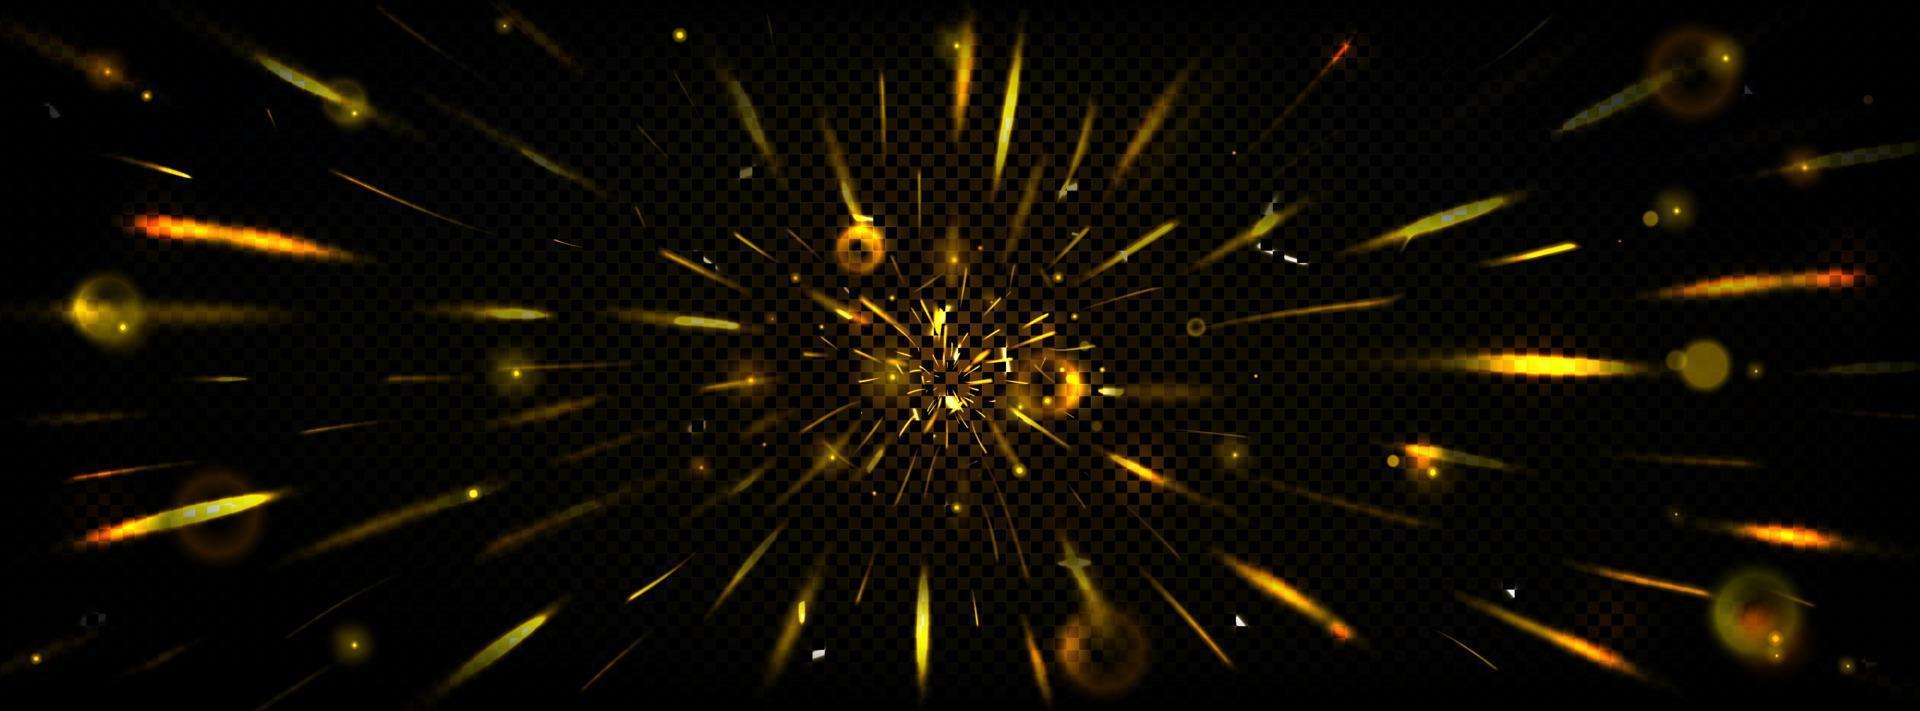 Sparks in motion with blur, speed light effect vector